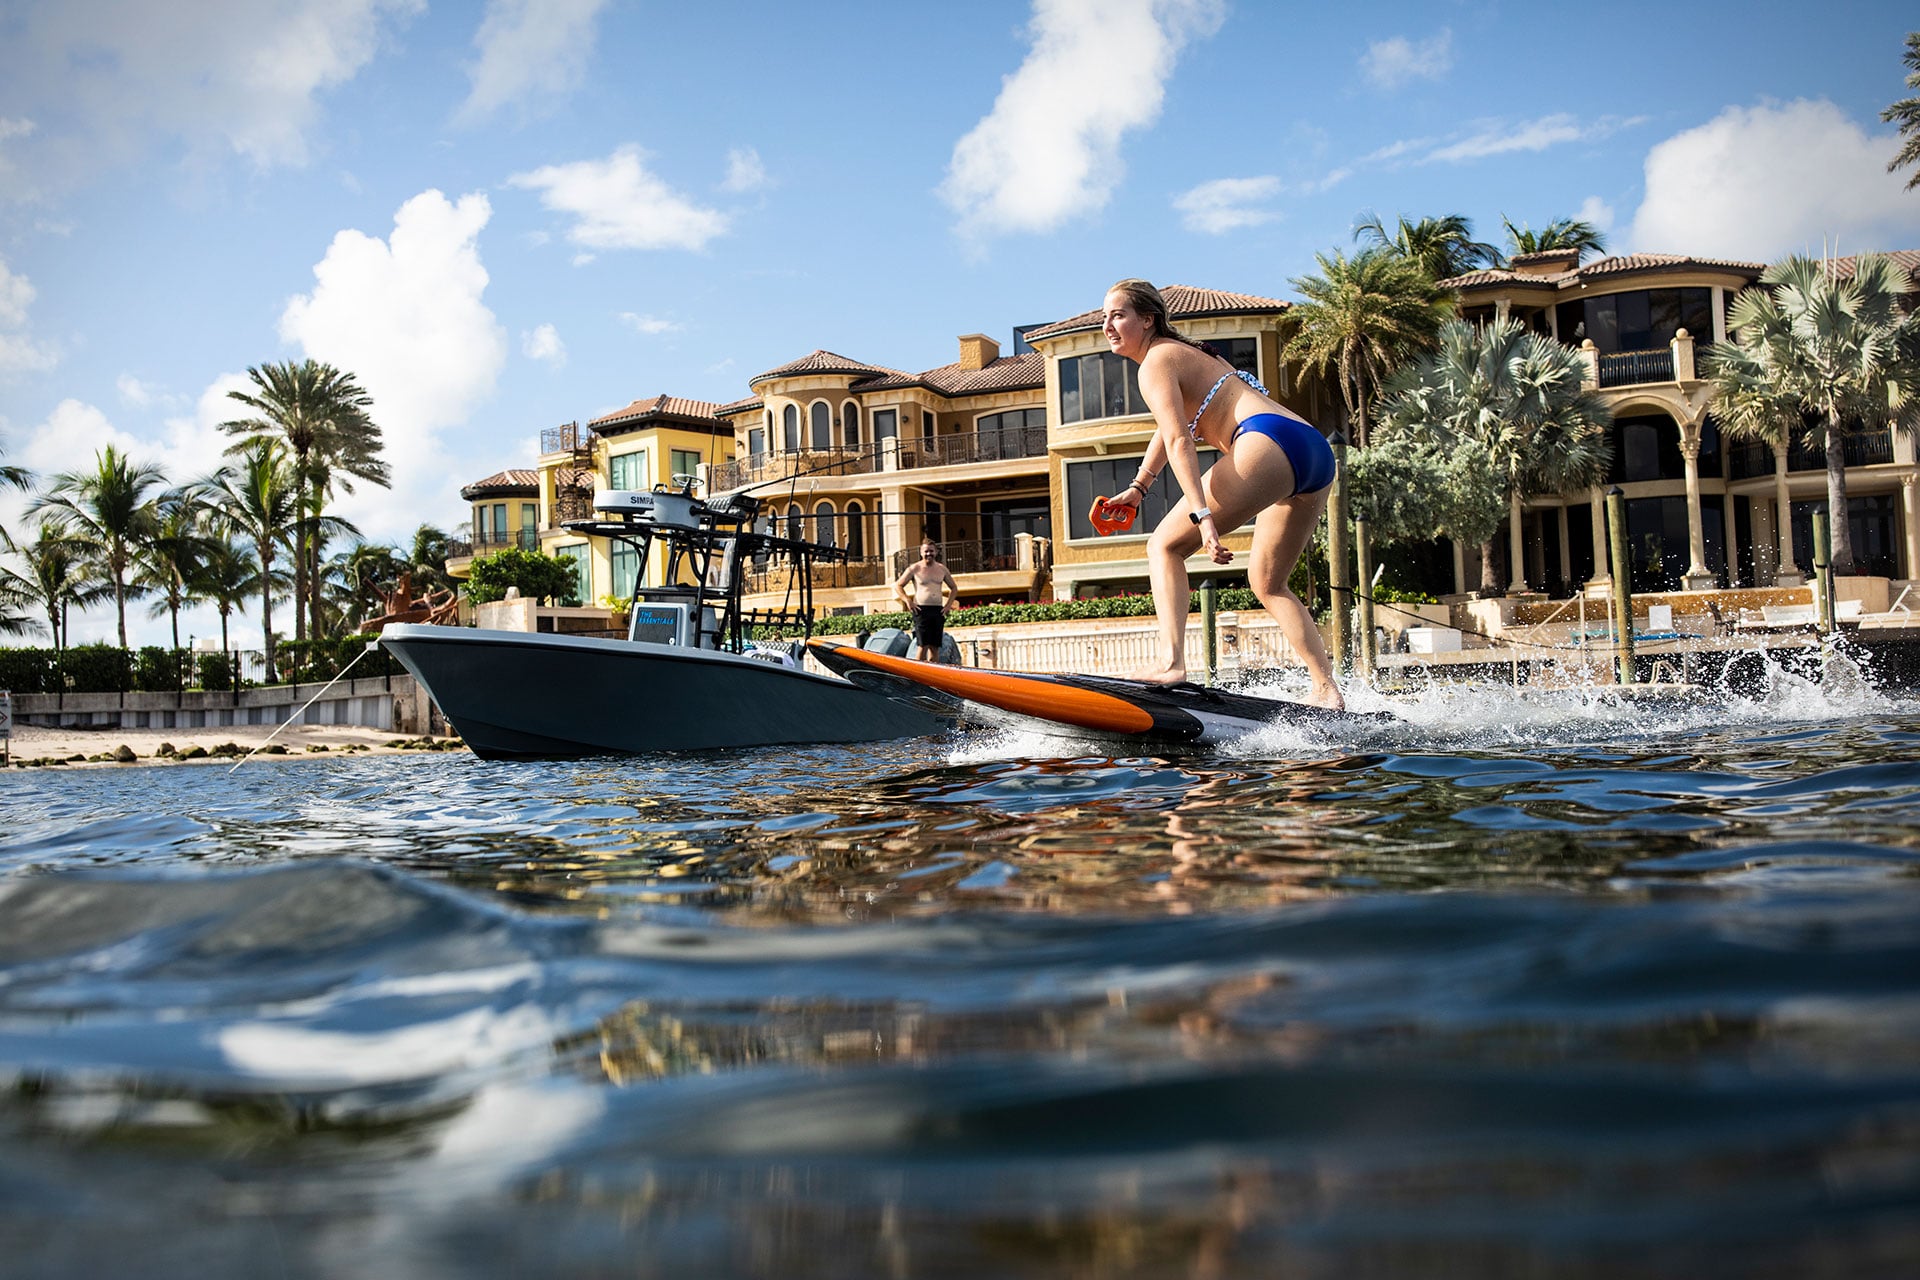 Yujet Surfer Electric Jetboard: Ride Without Waves